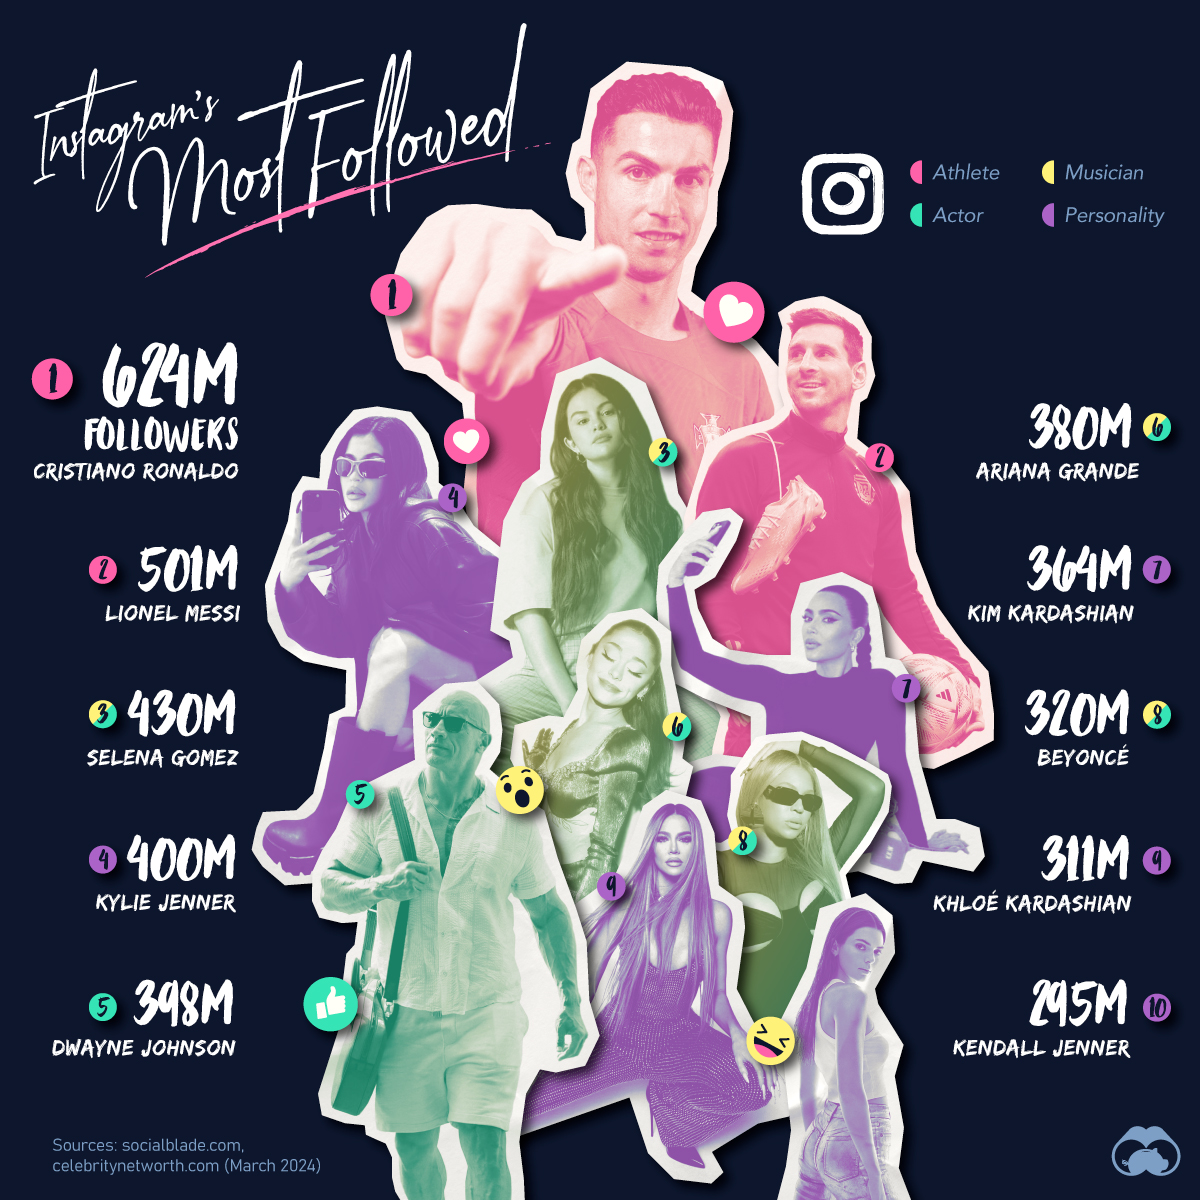 chart of the followed people on Instagram.